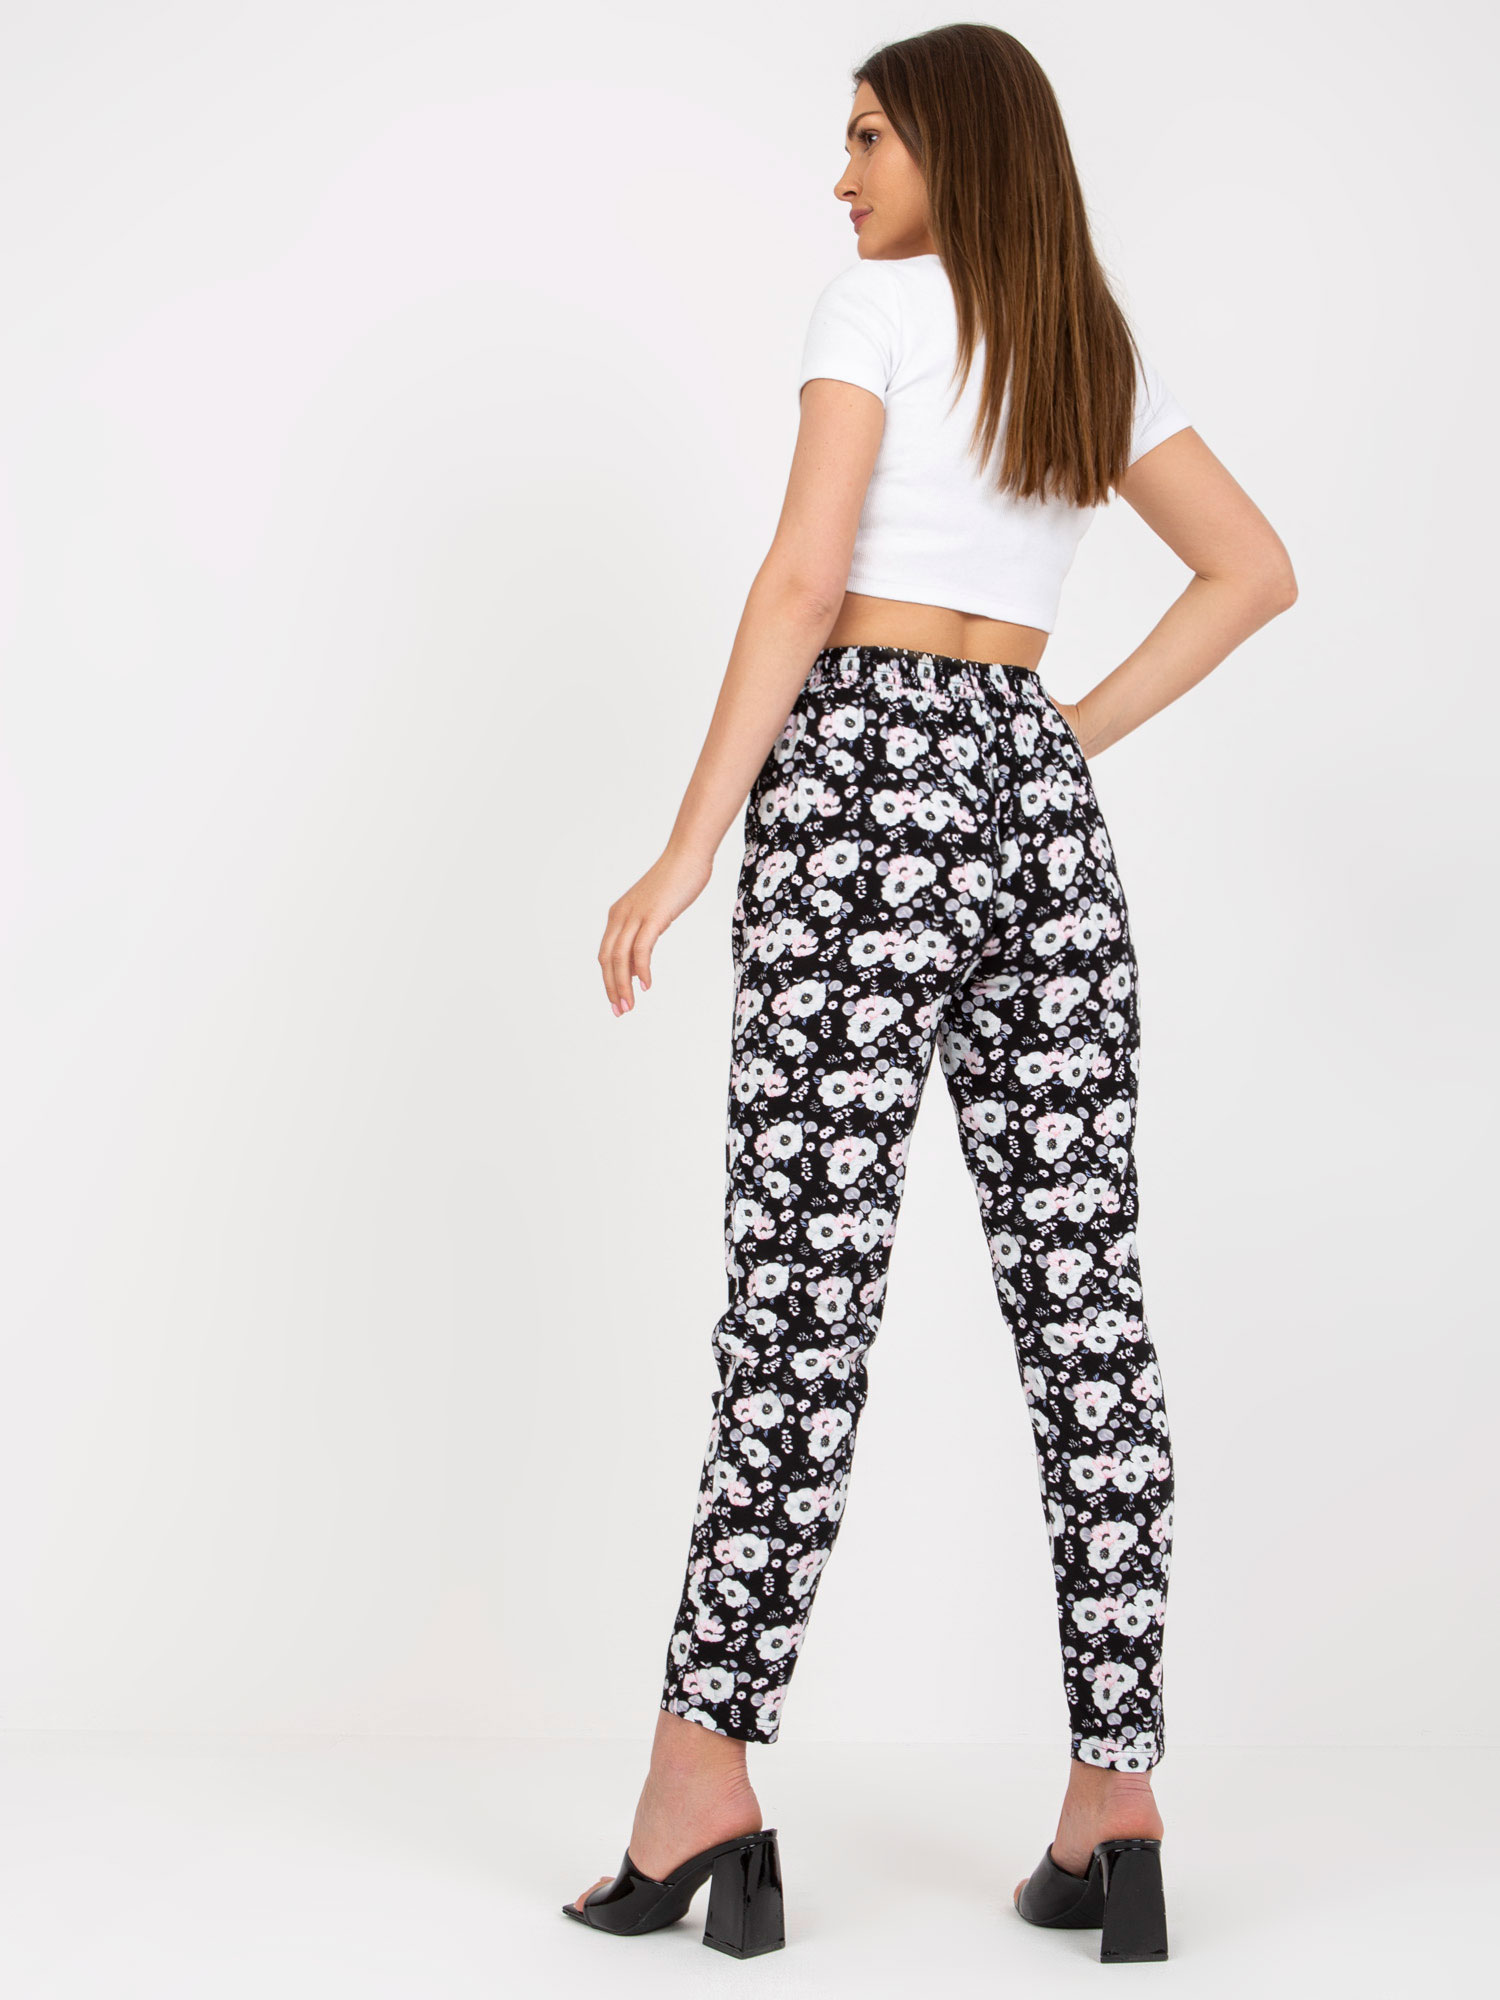 Black Light Trousers Made Of Fabric With SUBLEBEL Flowers